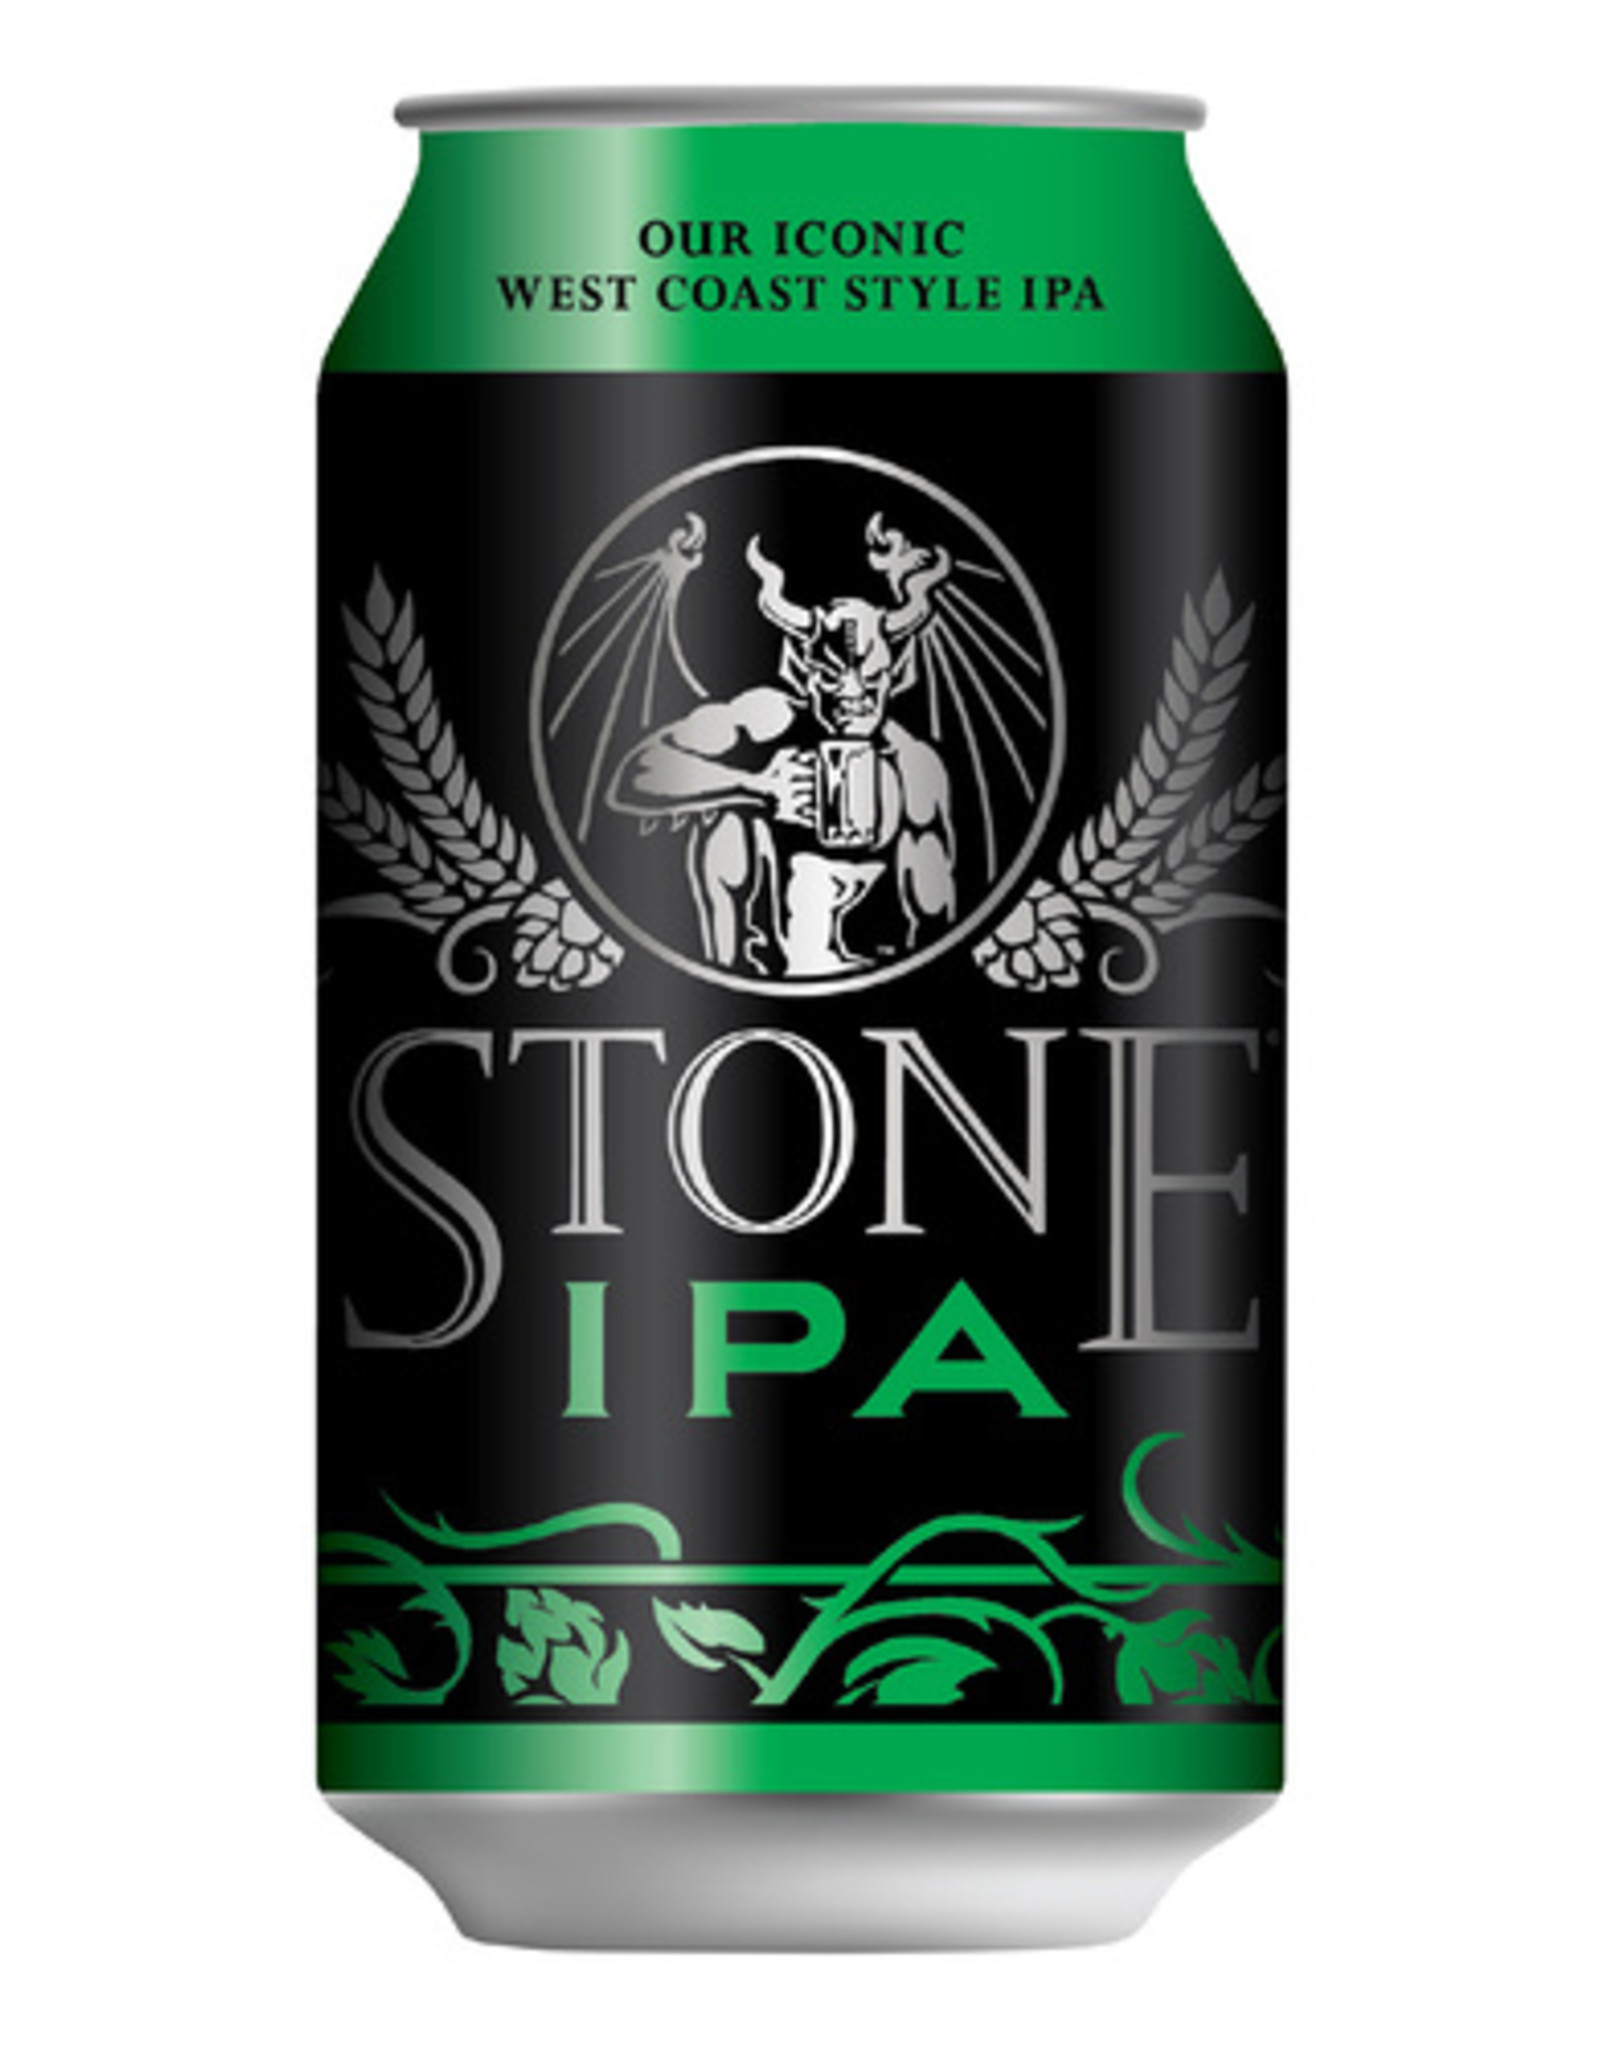 Stone IPA 6x12 oz cans